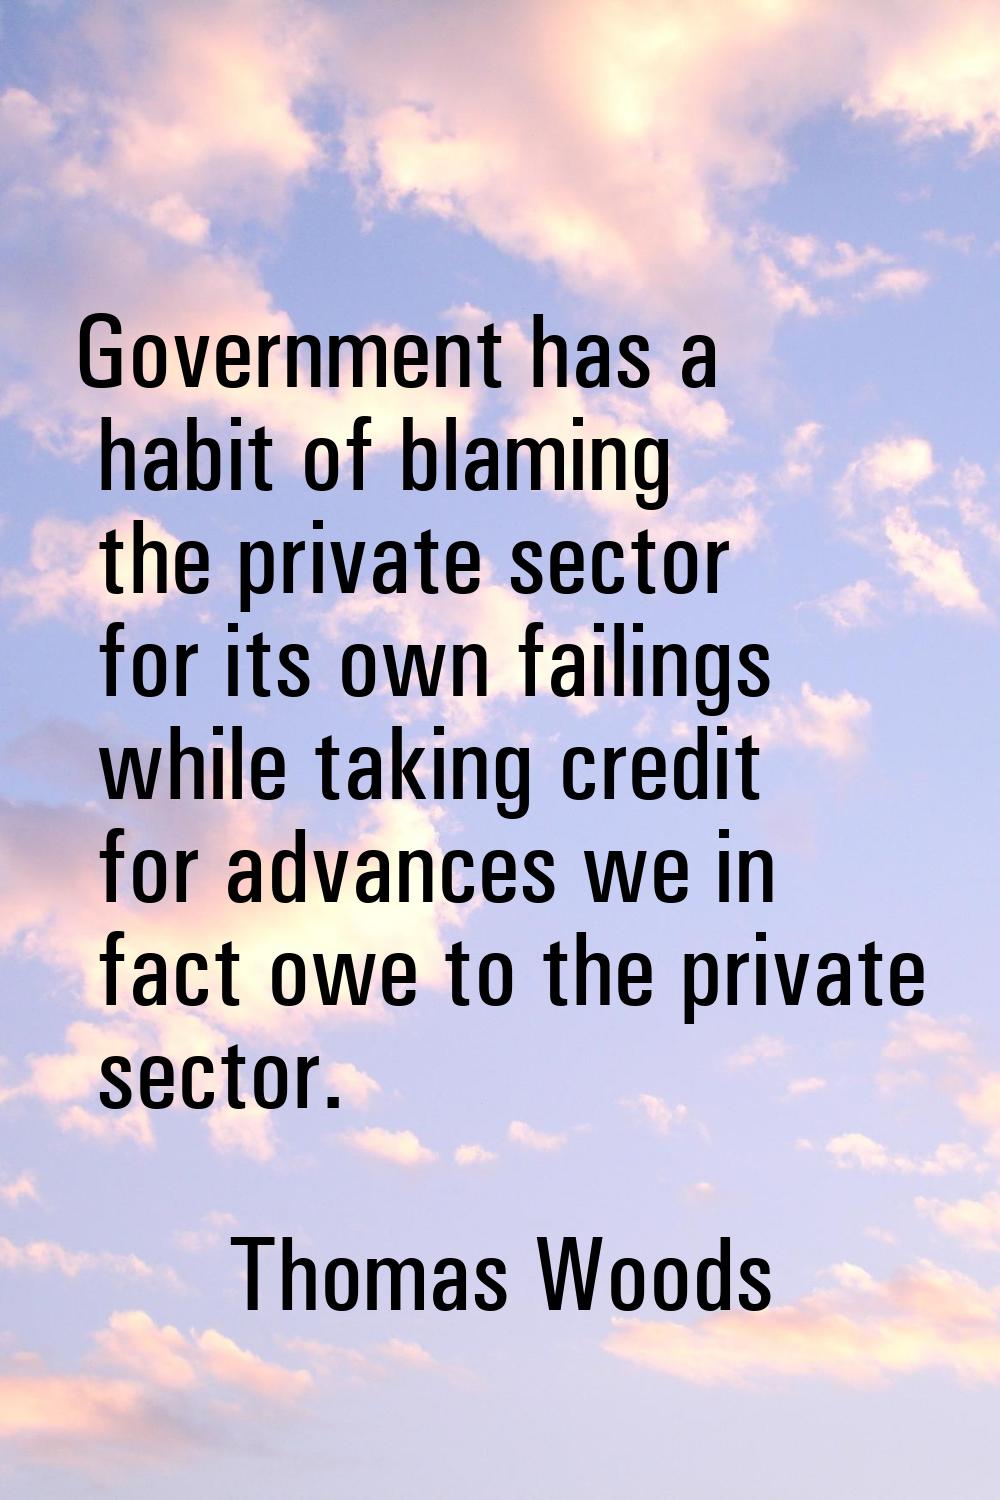 Government has a habit of blaming the private sector for its own failings while taking credit for a